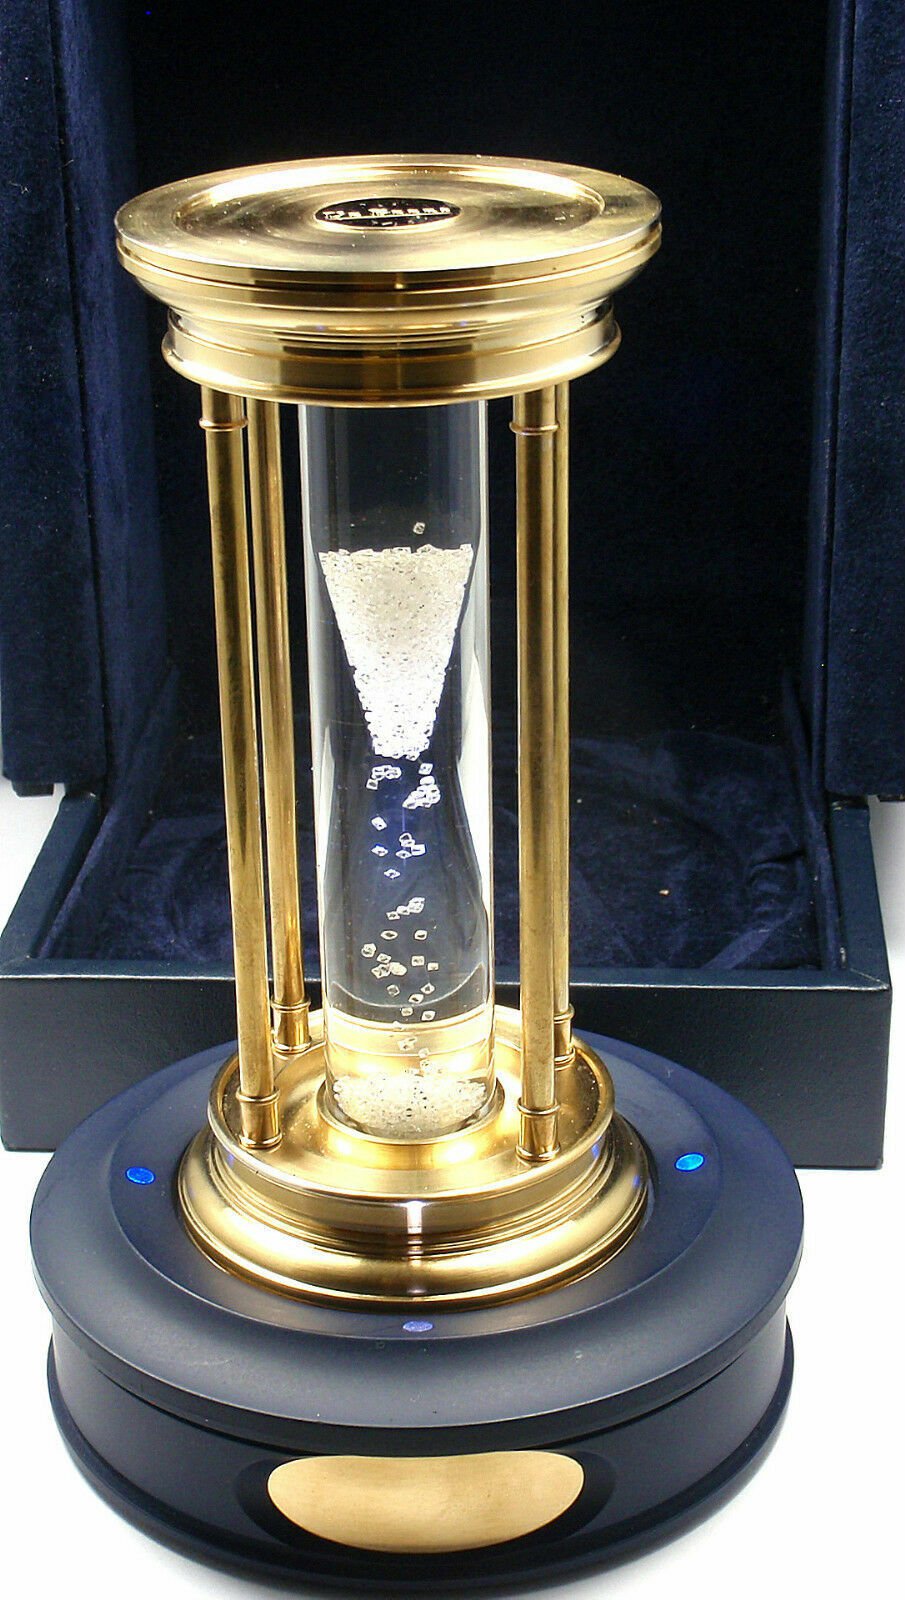 DeBeers Collectibles:Decorative Collectibles:Clocks:Other Clocks Very Rare! De Beers Limited Edition Millennium 2000 Diamond Brass Hourglass